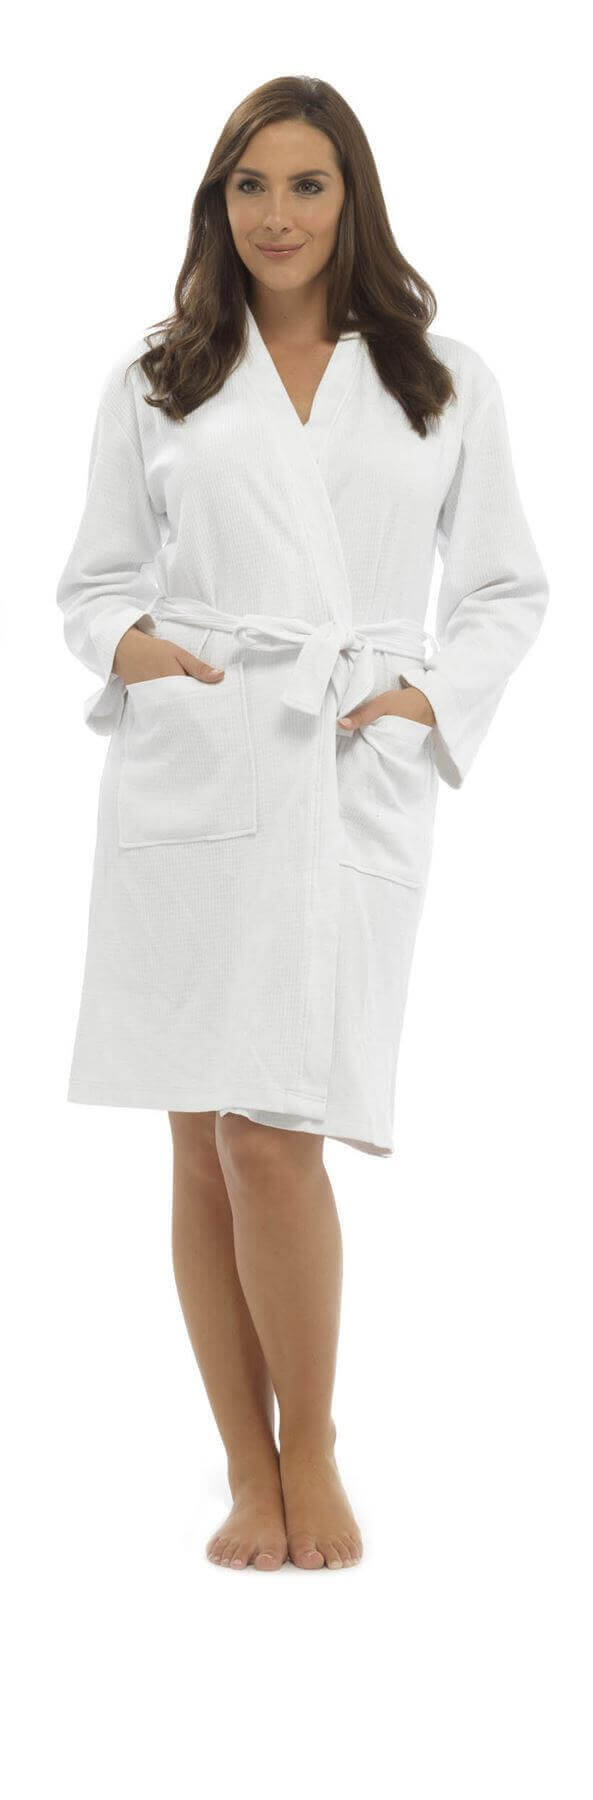 Women's Waffle 100% Cotton Dressing Gown Bath Robes. Buy now for £20.00. A Robe by Daisy Dreamer. 12-14, 16-18, 20-22, 8-10, bathrobe, comfortable, cotton, dressing, dressing gown, girls, gowns, green, gym, hosusecoat, hotel, ladies, large, loungewear, me